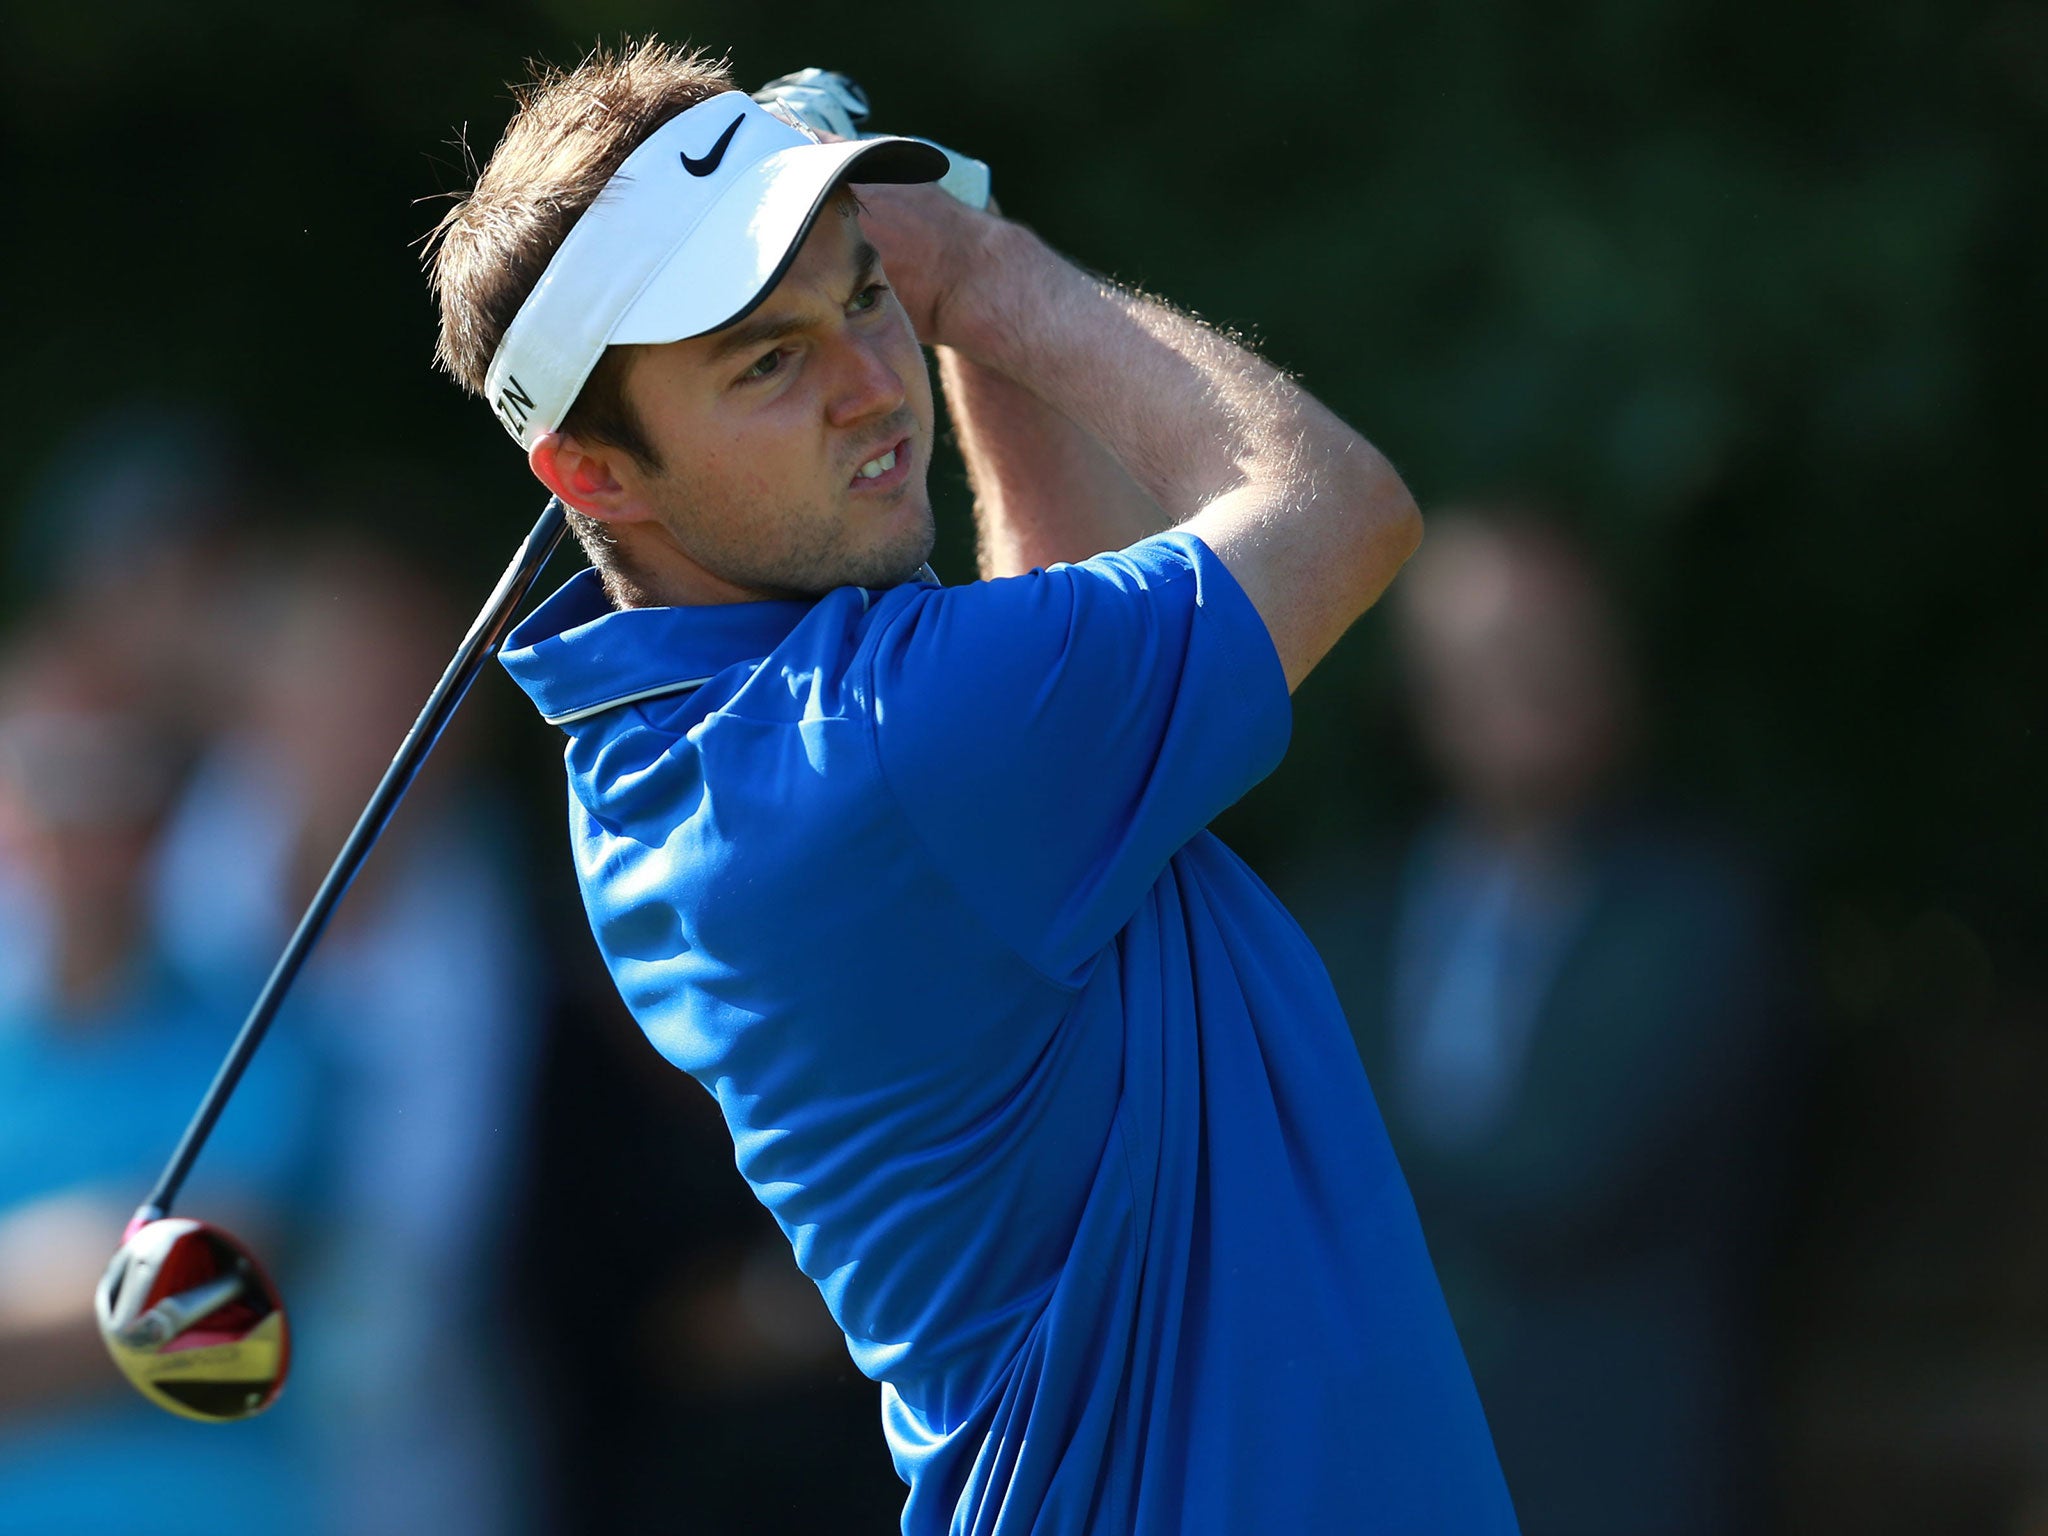 Ashley Chesters’ two-under 70 left him trailing only Rory
McIlroy as best from the UK